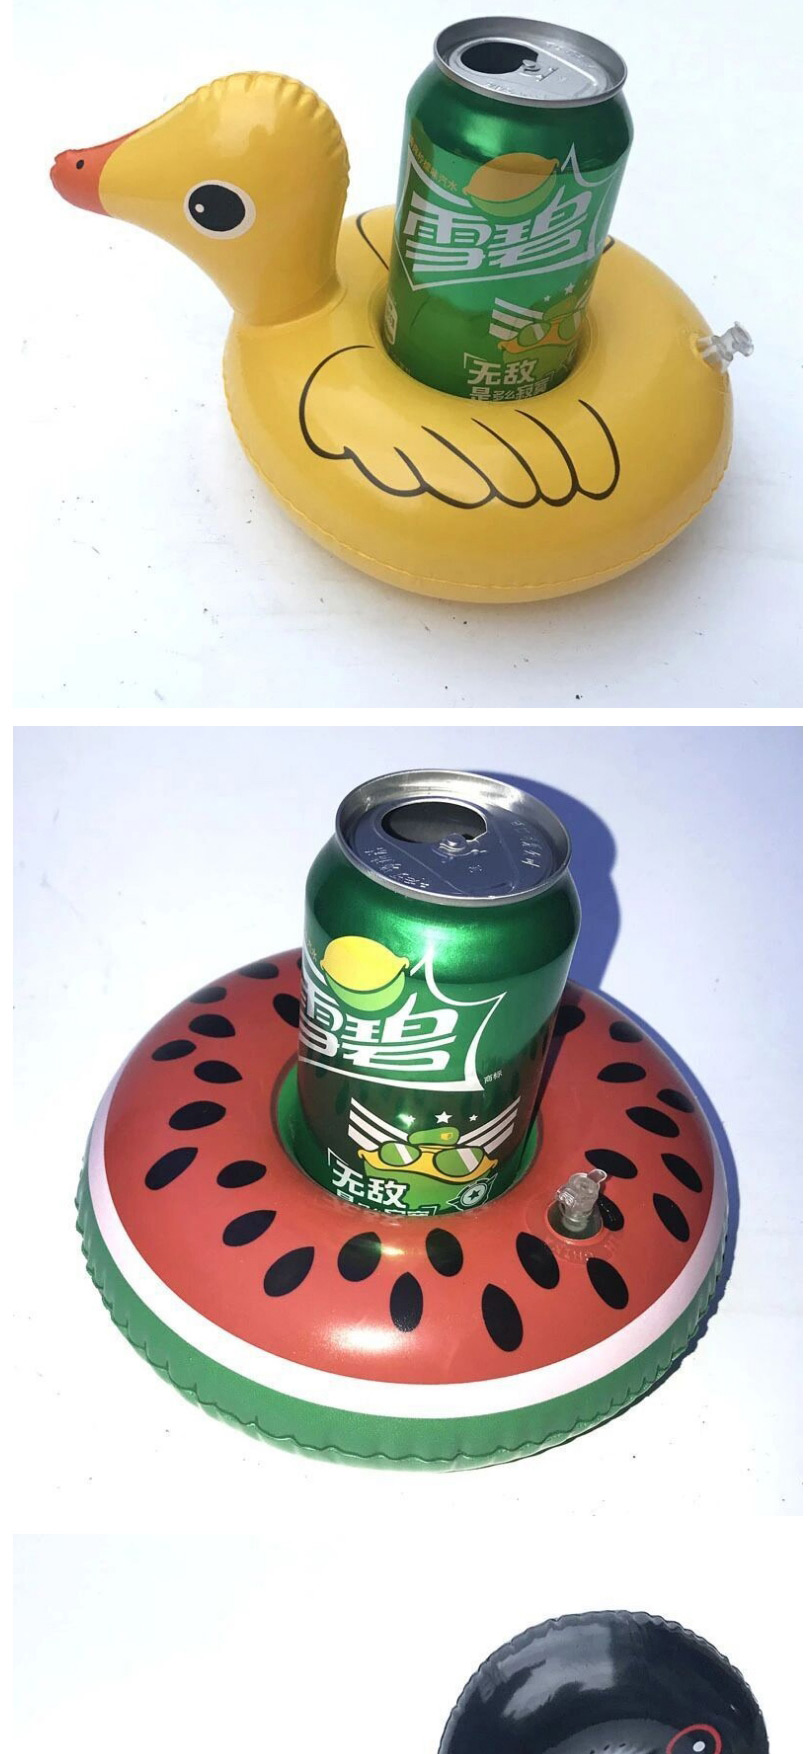 Fashion Watermelon Cup Holder Pvc Inflatable Watermelon Drink Cup Holder,Swim Rings